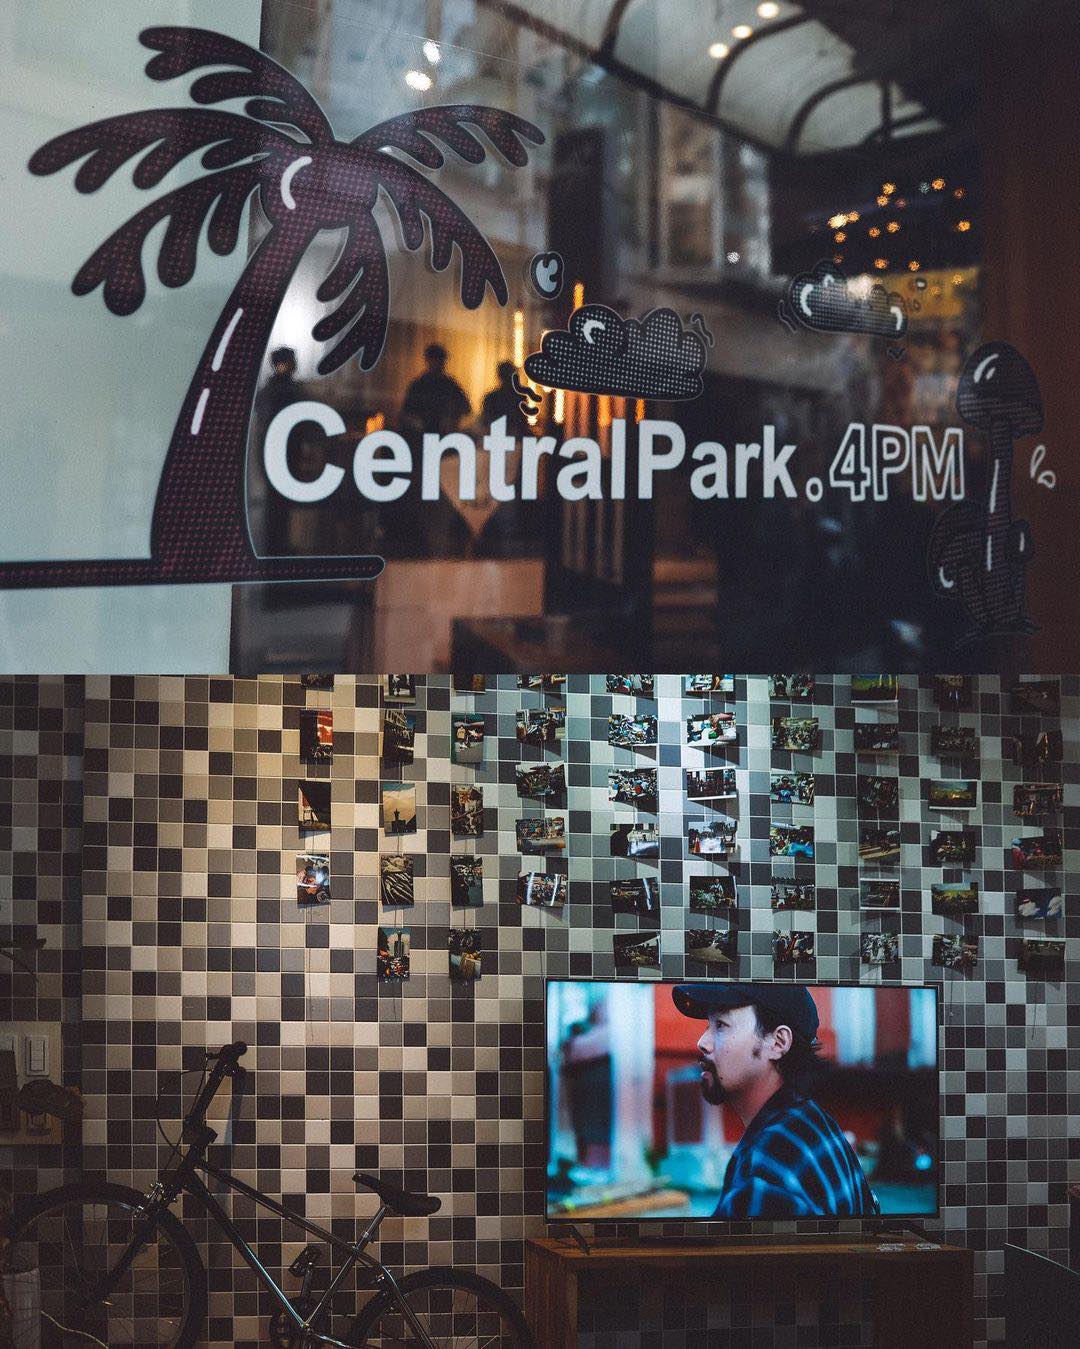 CentralPark.4PM Pop-Up Store 2021 @nexhype taichung